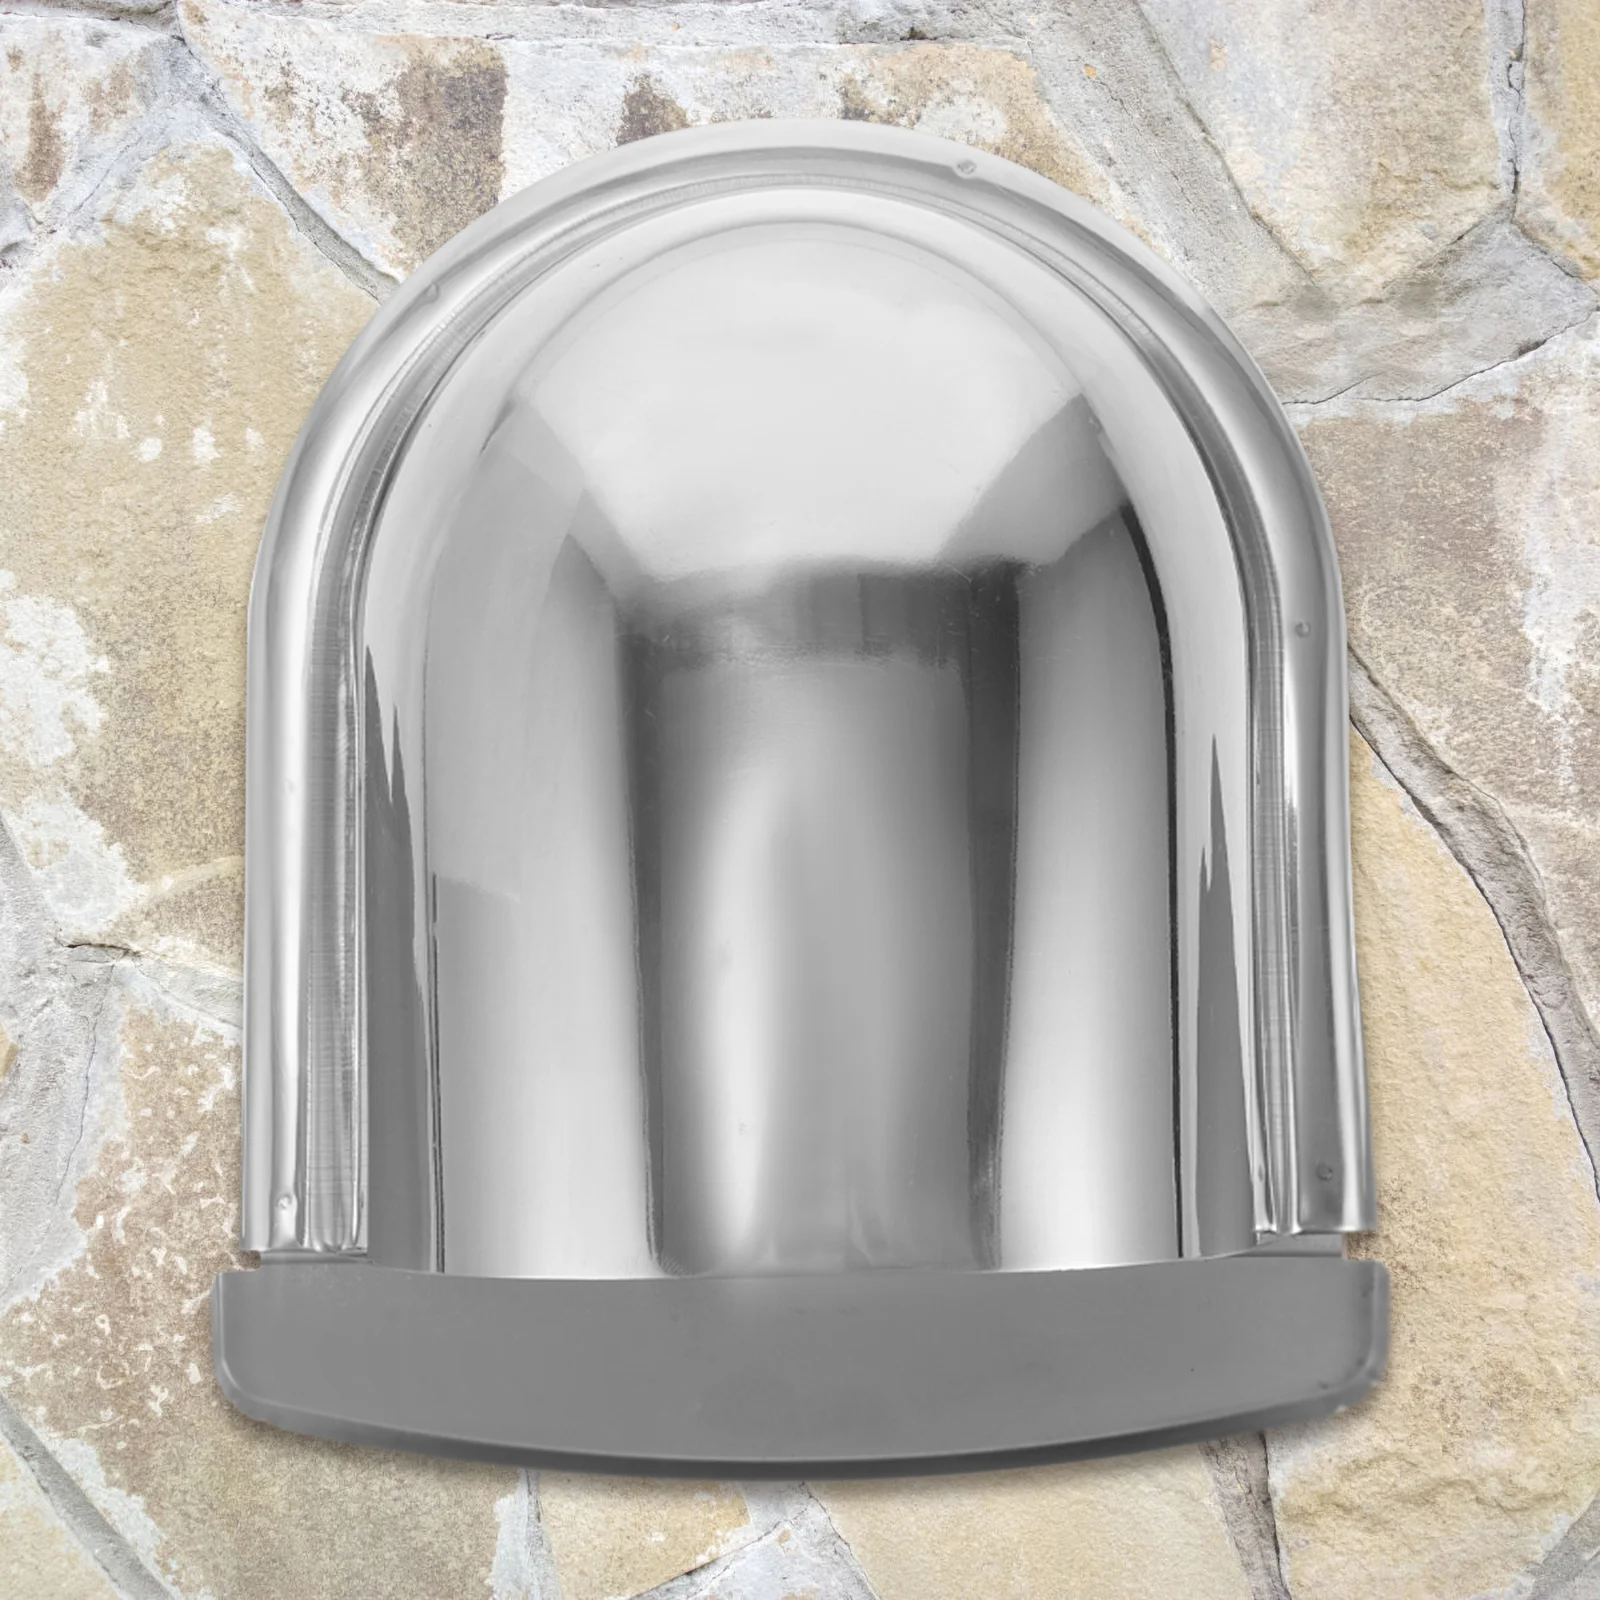 

Roof Rain Hat Fireplace Chimney Vent Rainproof Cover Caps Pipeline Round 201 Stainless Steel Smoke Funnel